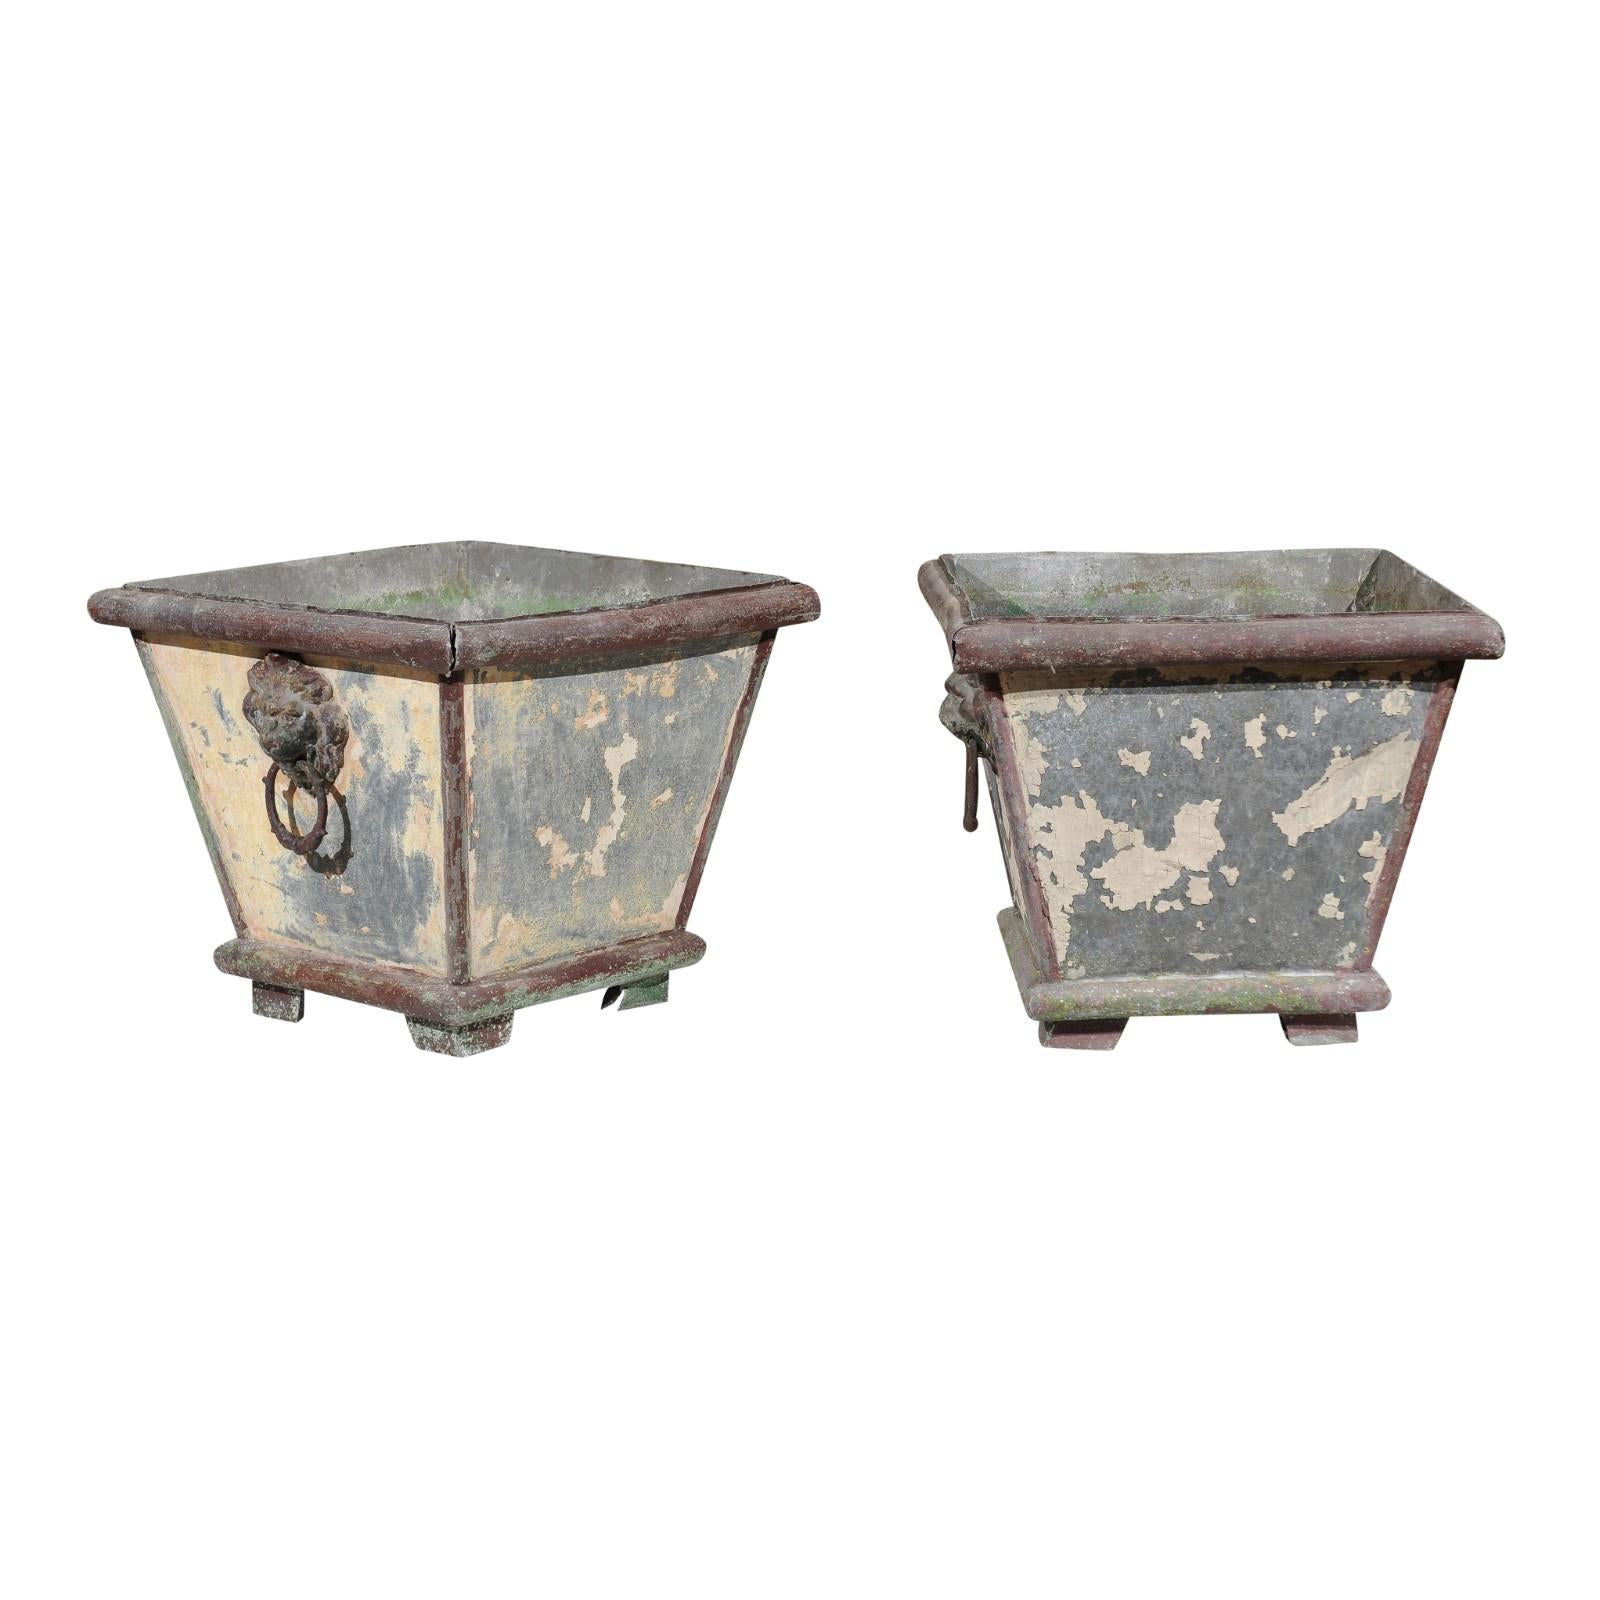 Pair of French 1900s Zinc Planters with Weathered Patina and Lion Head Motifs